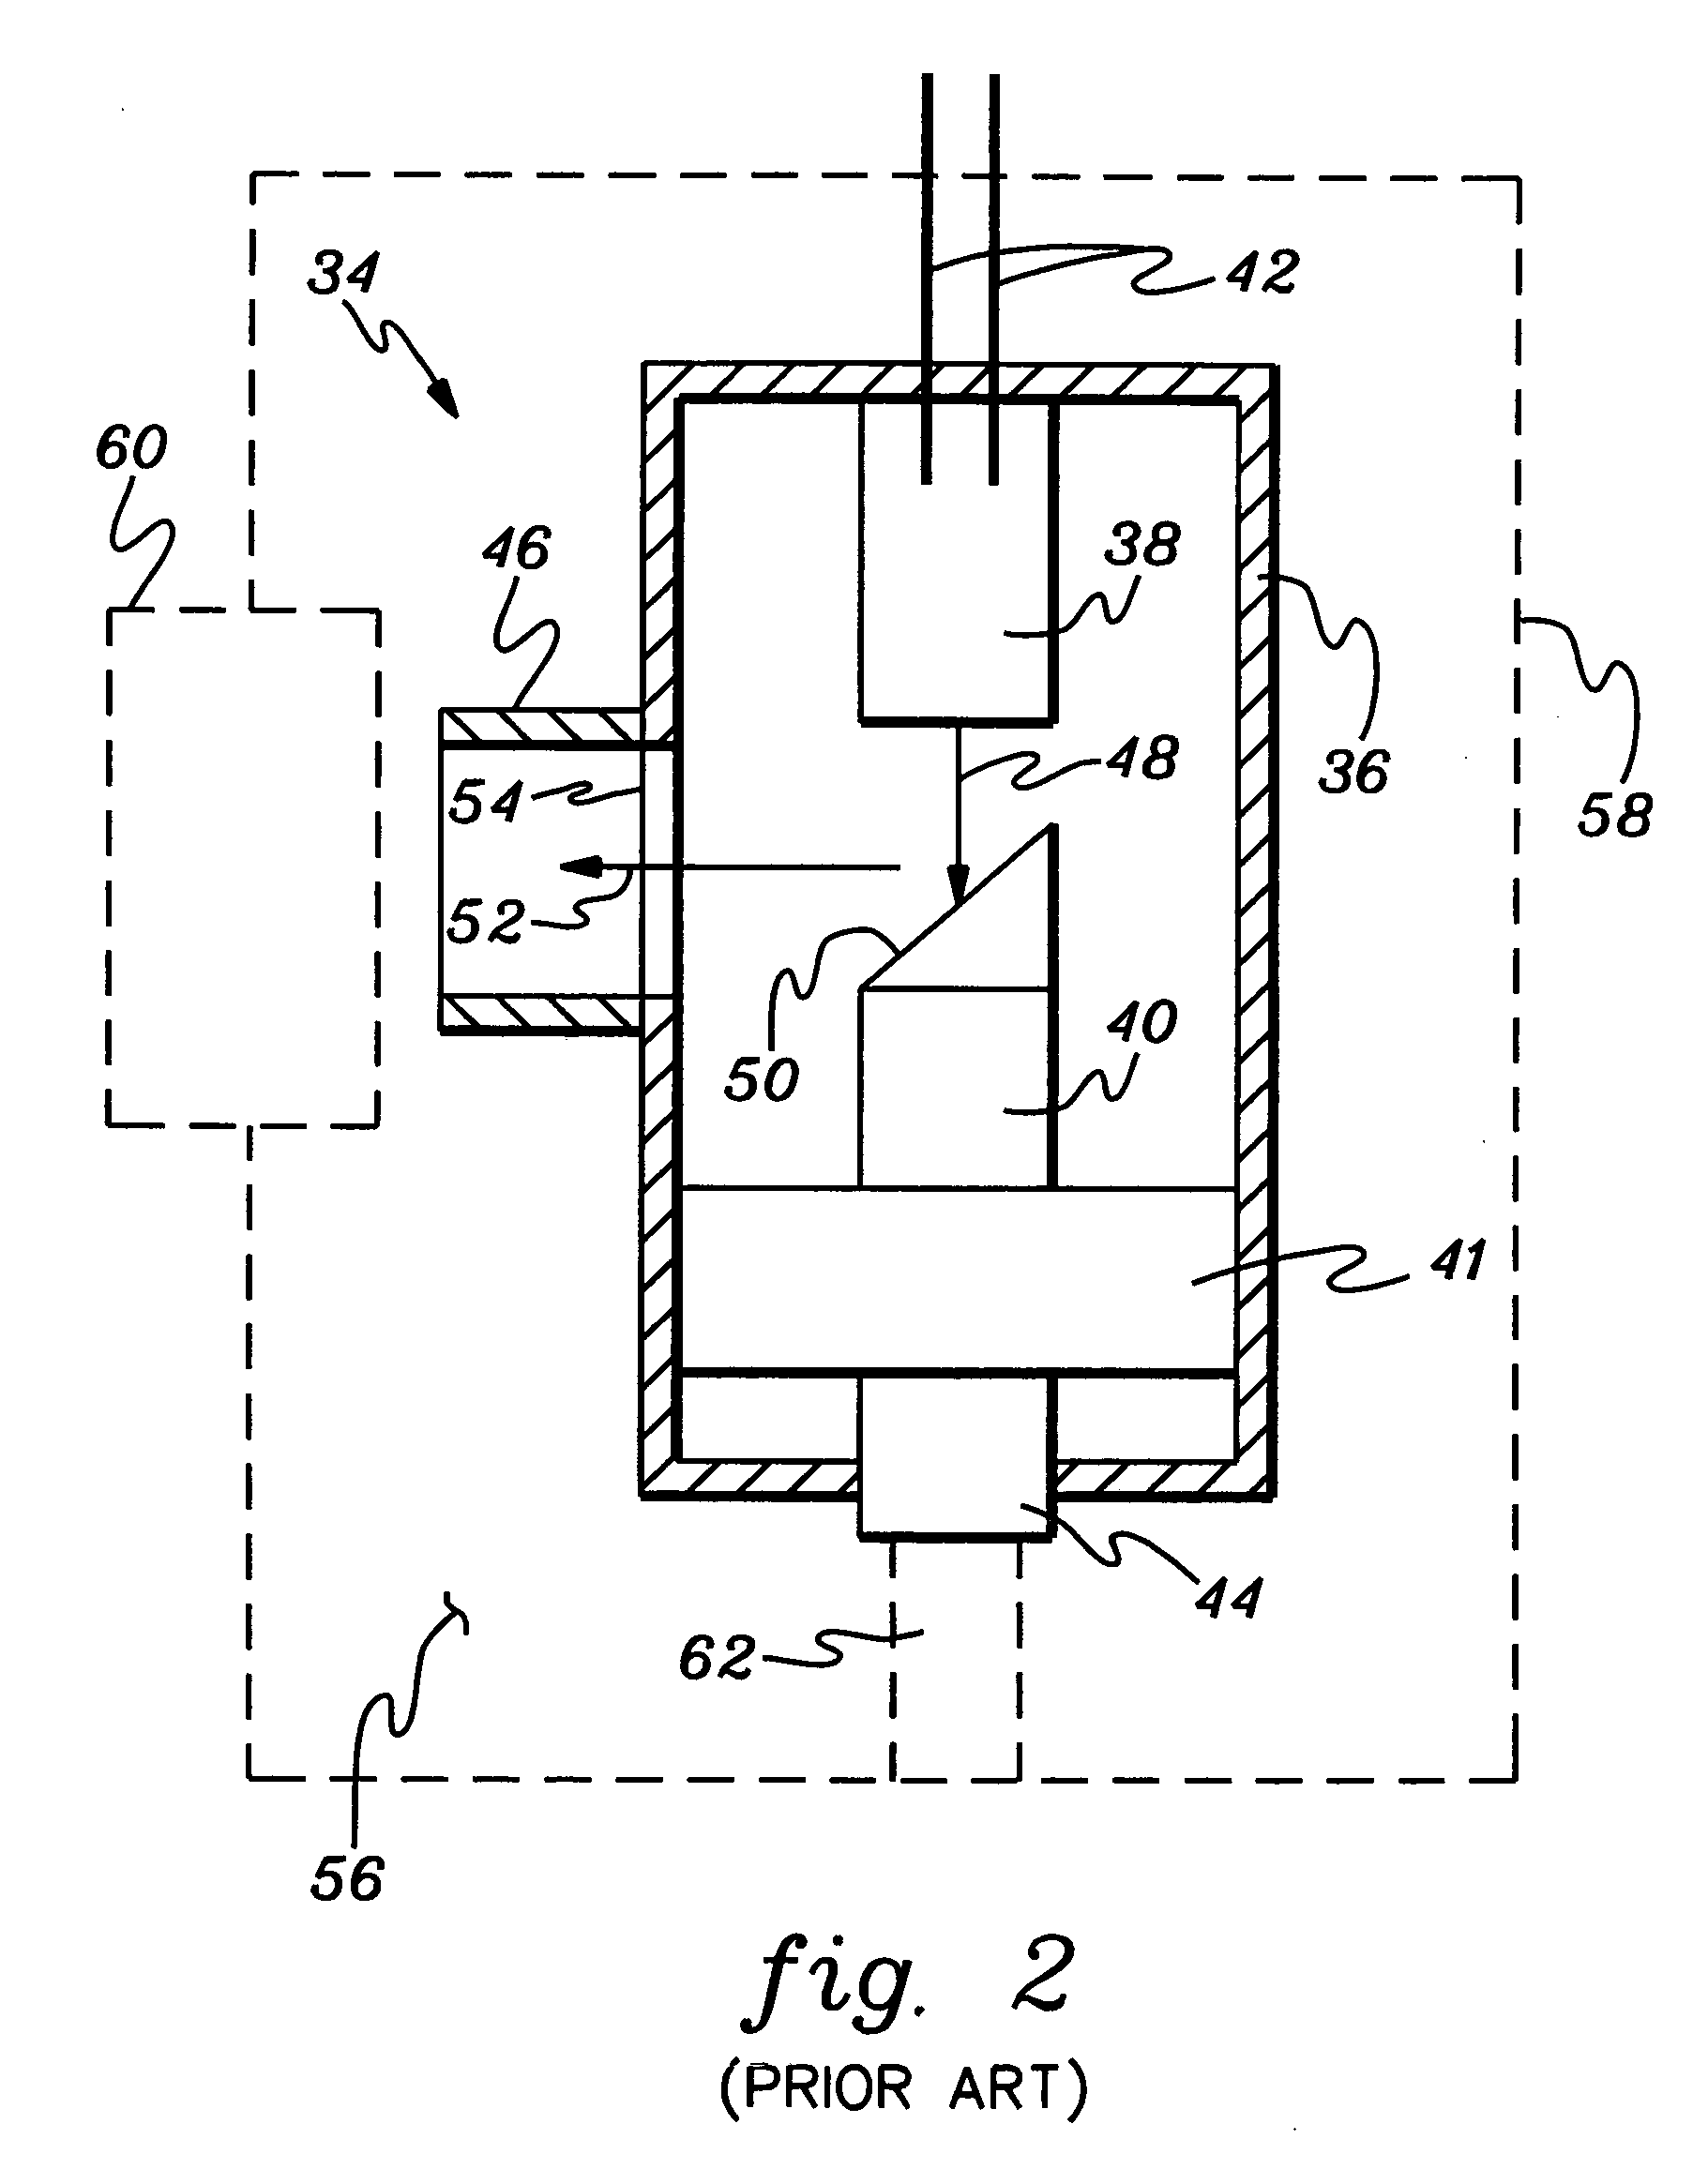 Method and device for cooling and electrically insulating a high-voltage, heat-generating component such as an x-ray tube for analyzing fluid streams